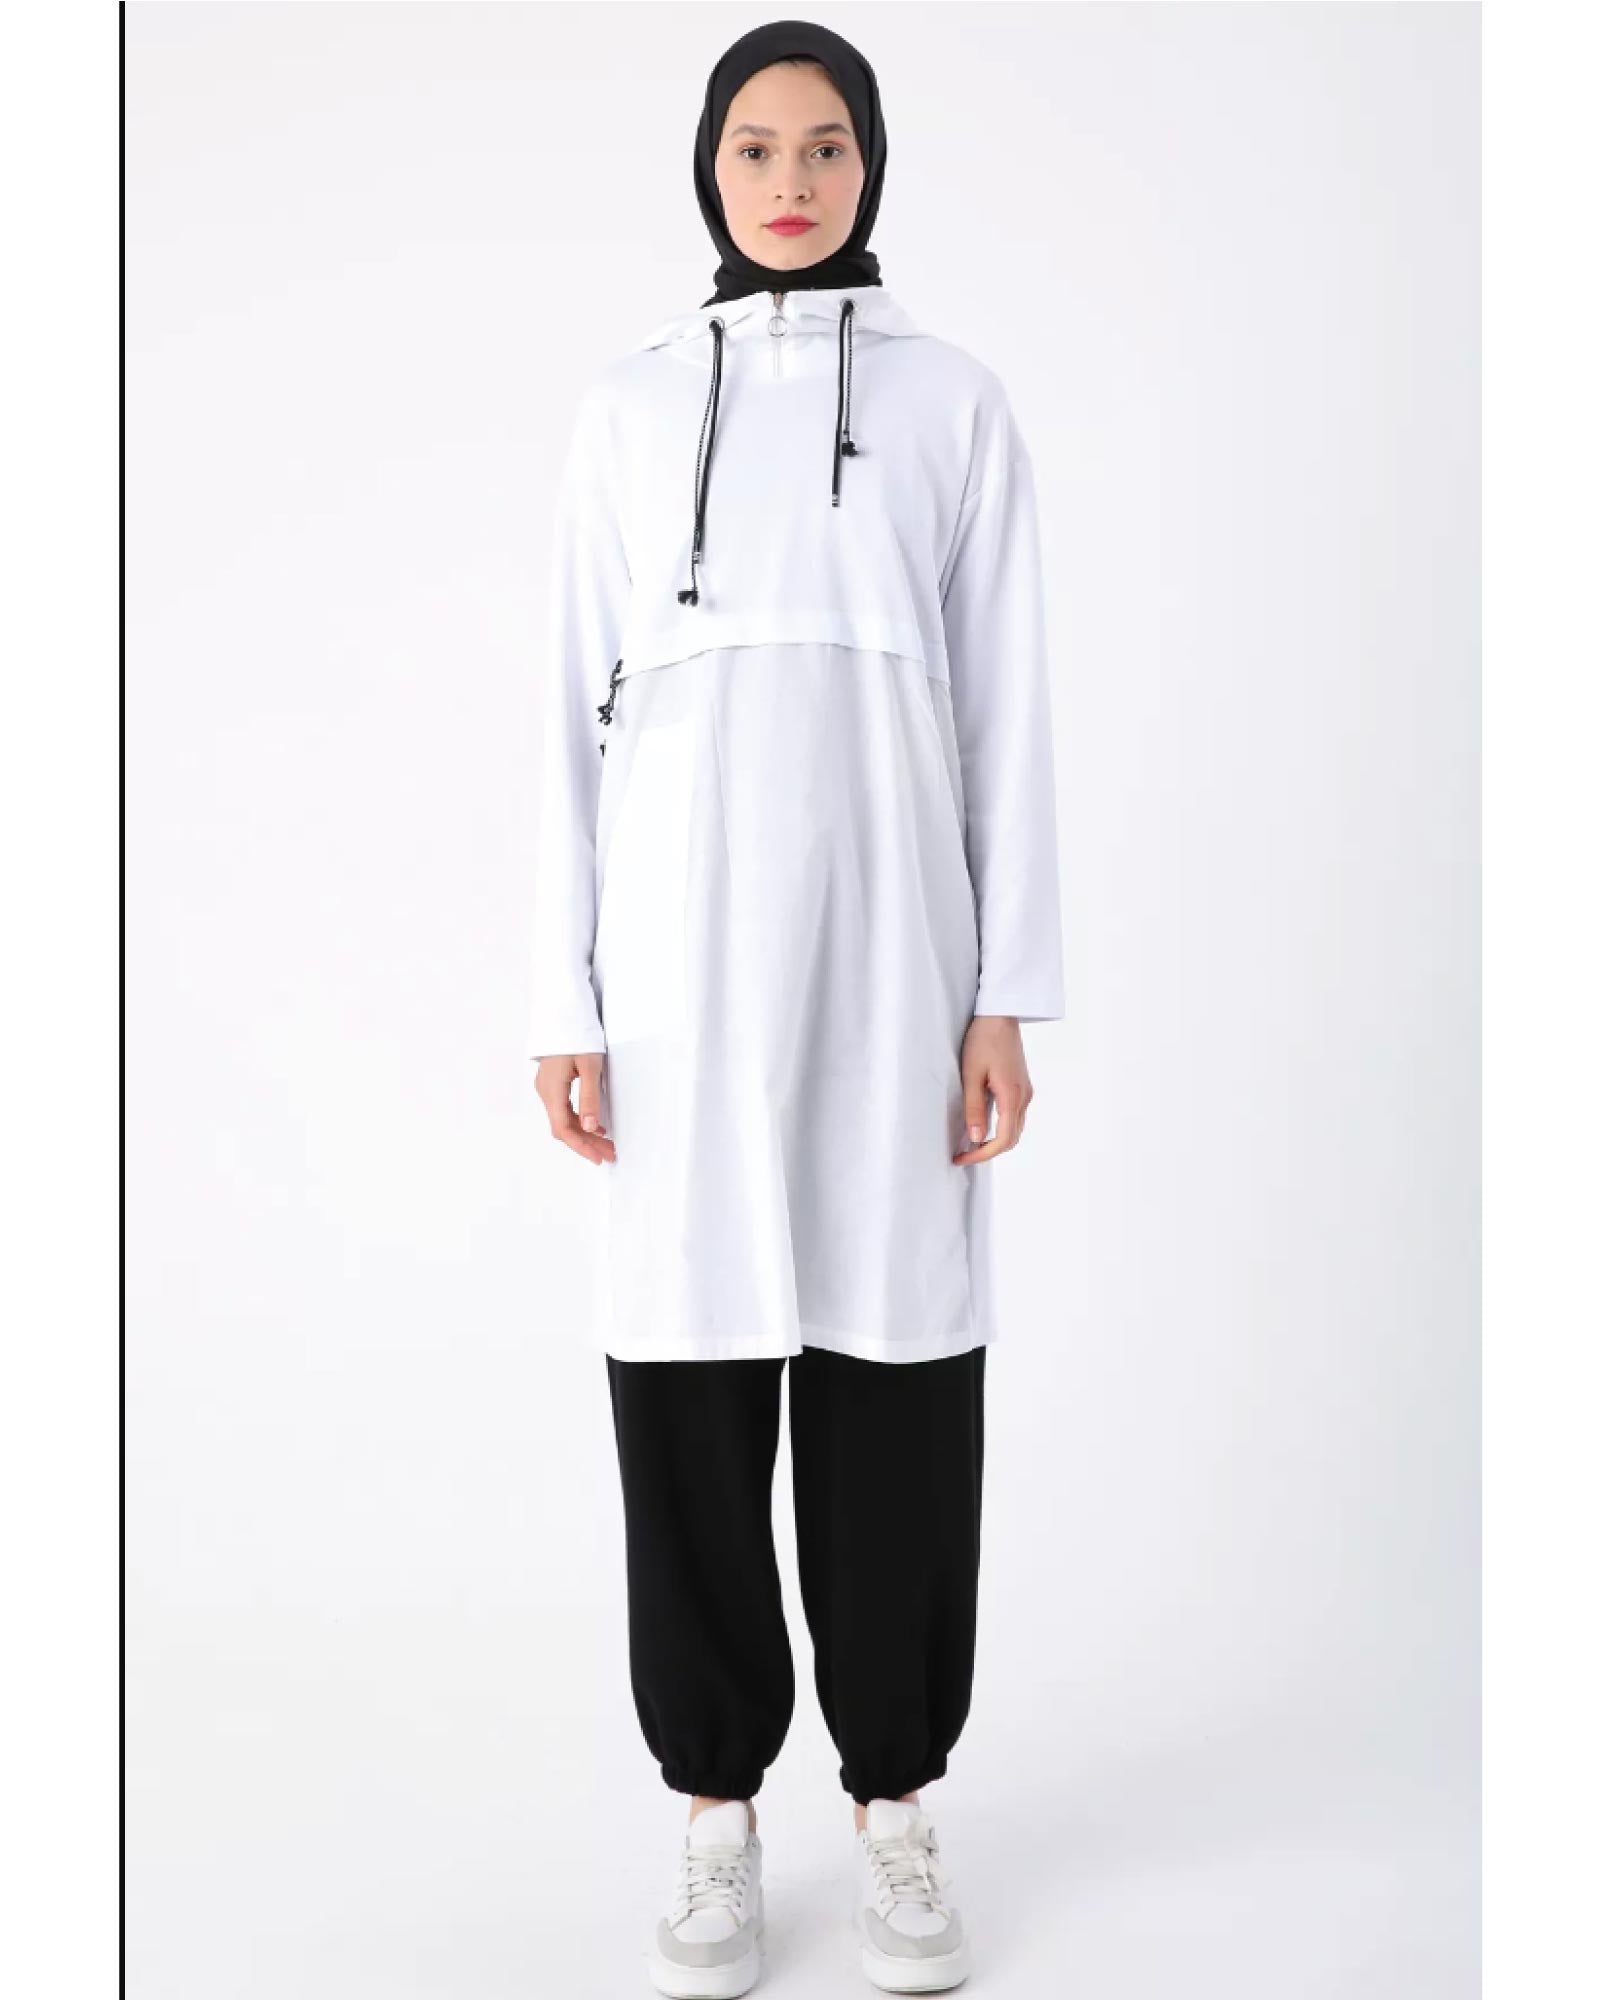 Hijab- cropped hooded sweat tunic made from cotton yarn with birds eye detail